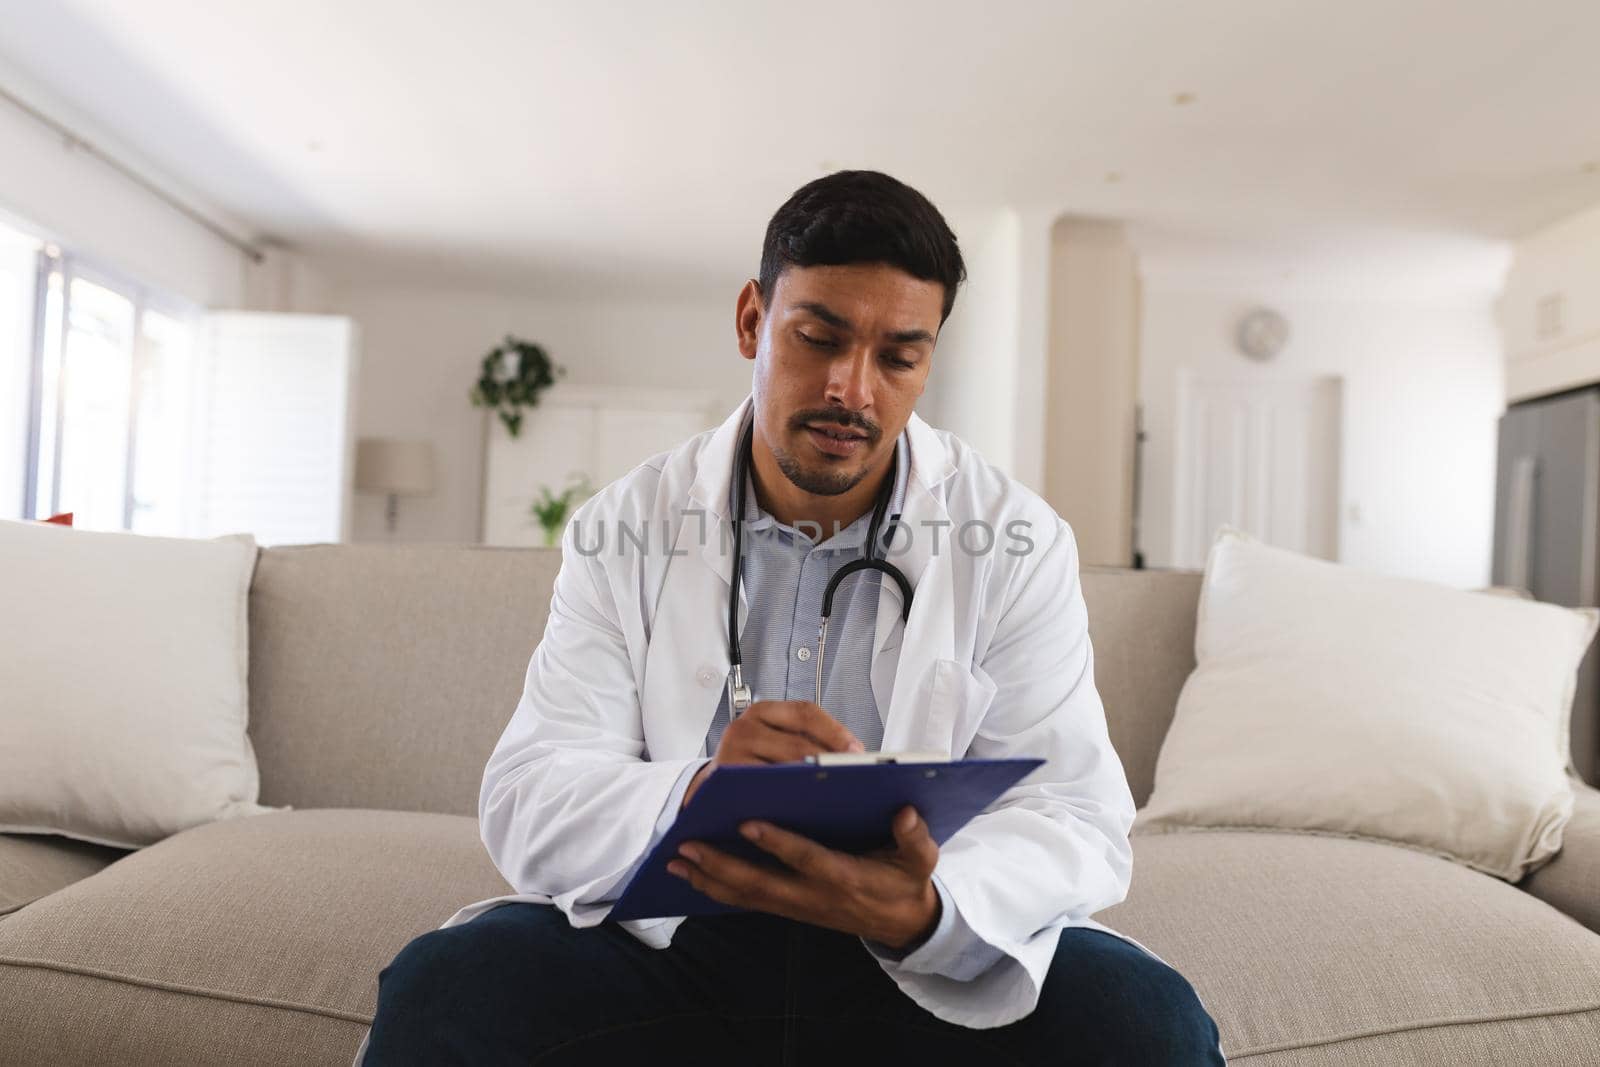 Hispanic male doctor sitting on couch making notes during consultation video call. telemedicine, medical and healthcare services during coronavirus covid 19 pandemic.